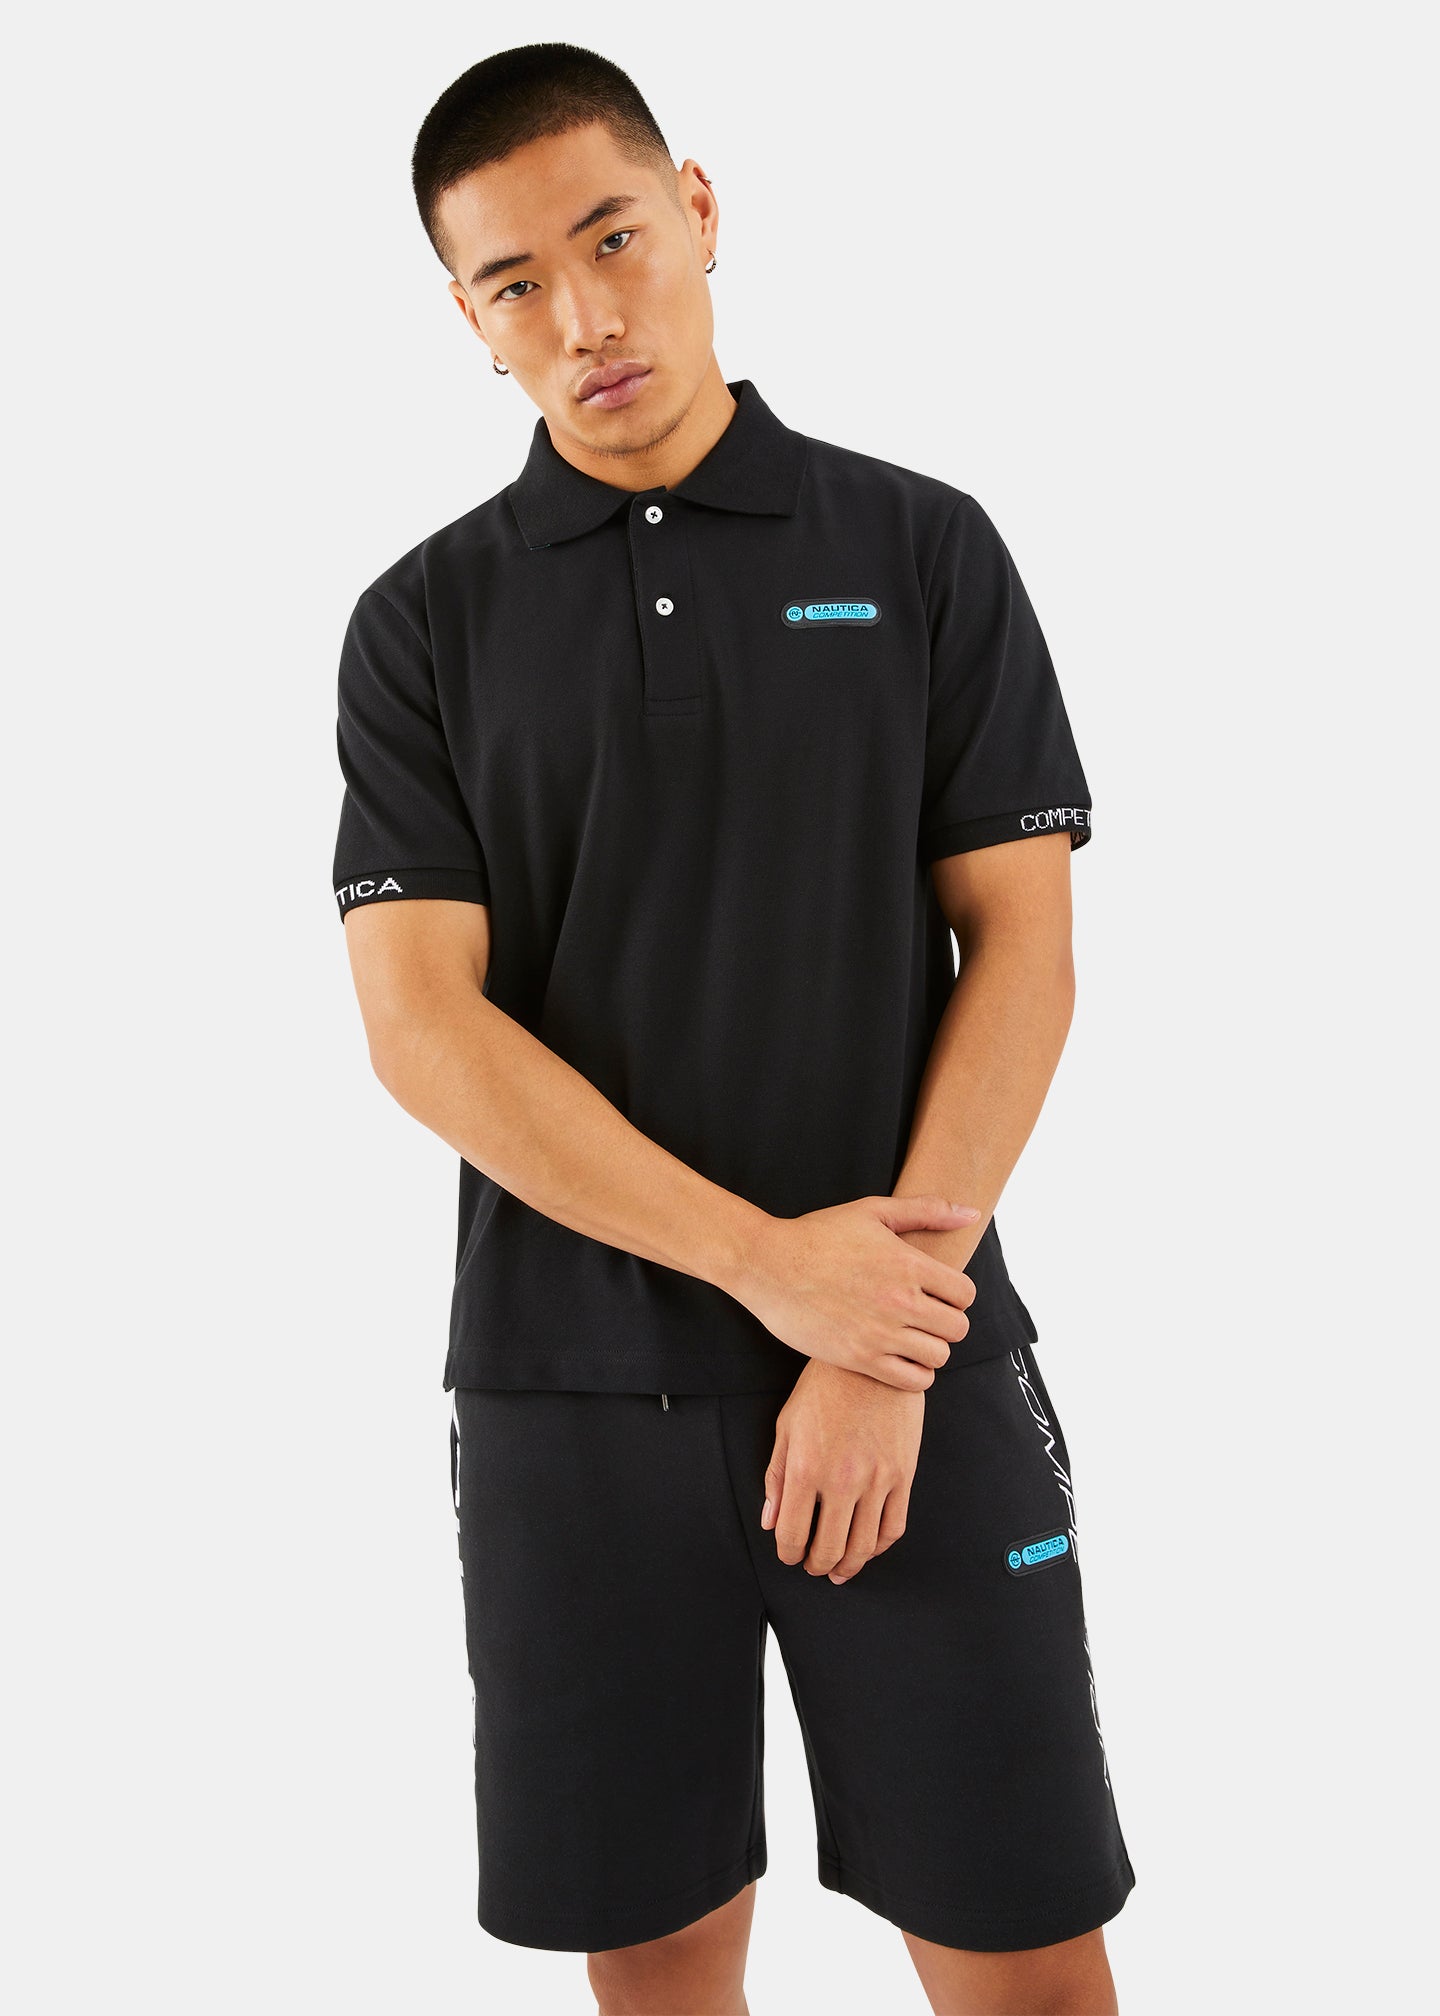 Nautica Competition Paxton Polo Shirt - Black - Front